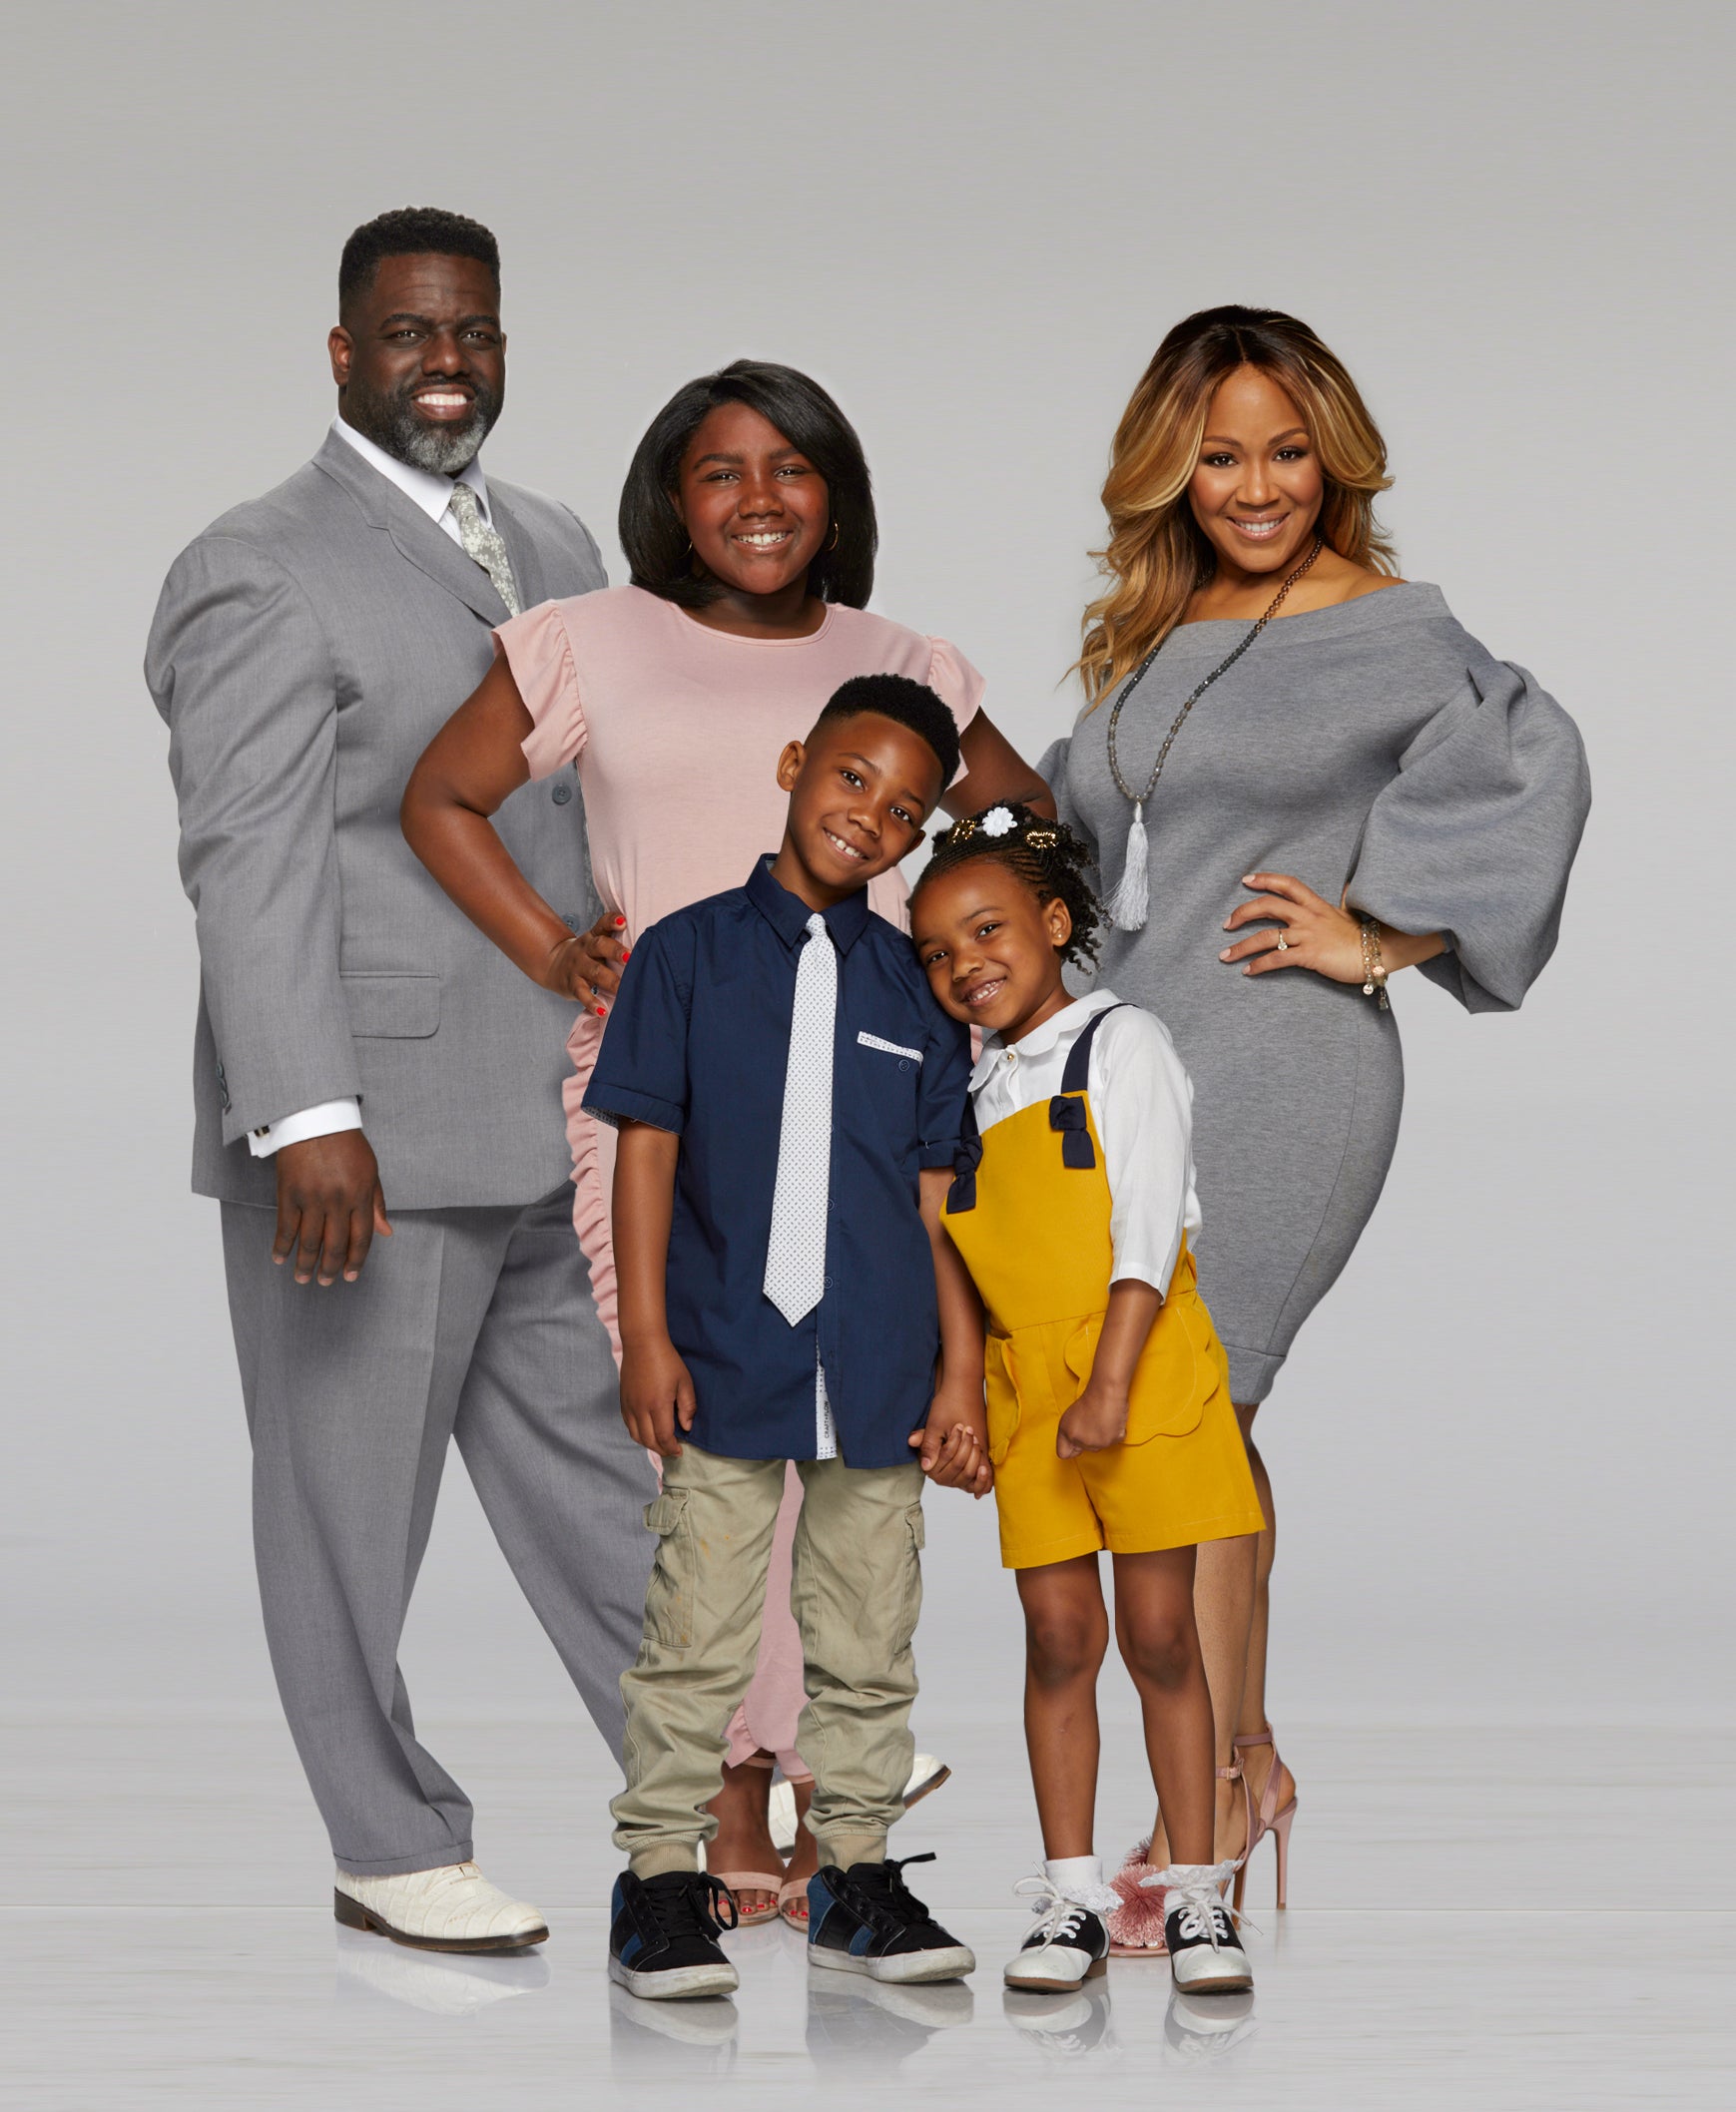 Erica Campbell's Morning Family Prayer Is What You Need To Get Through The Day
